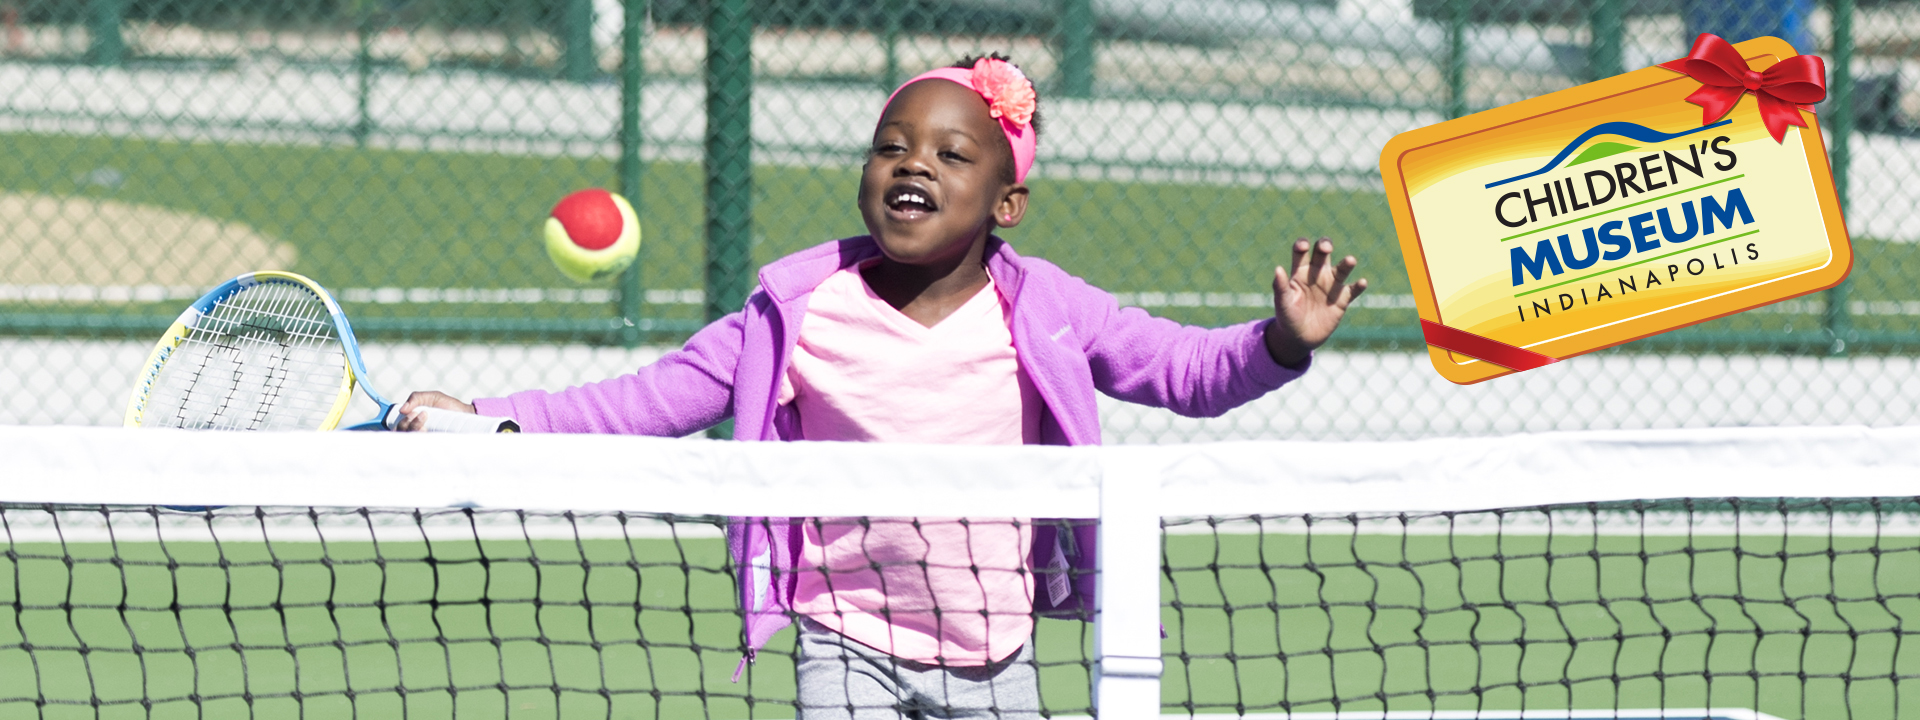 Young girl playing tennis in the Sports Experience